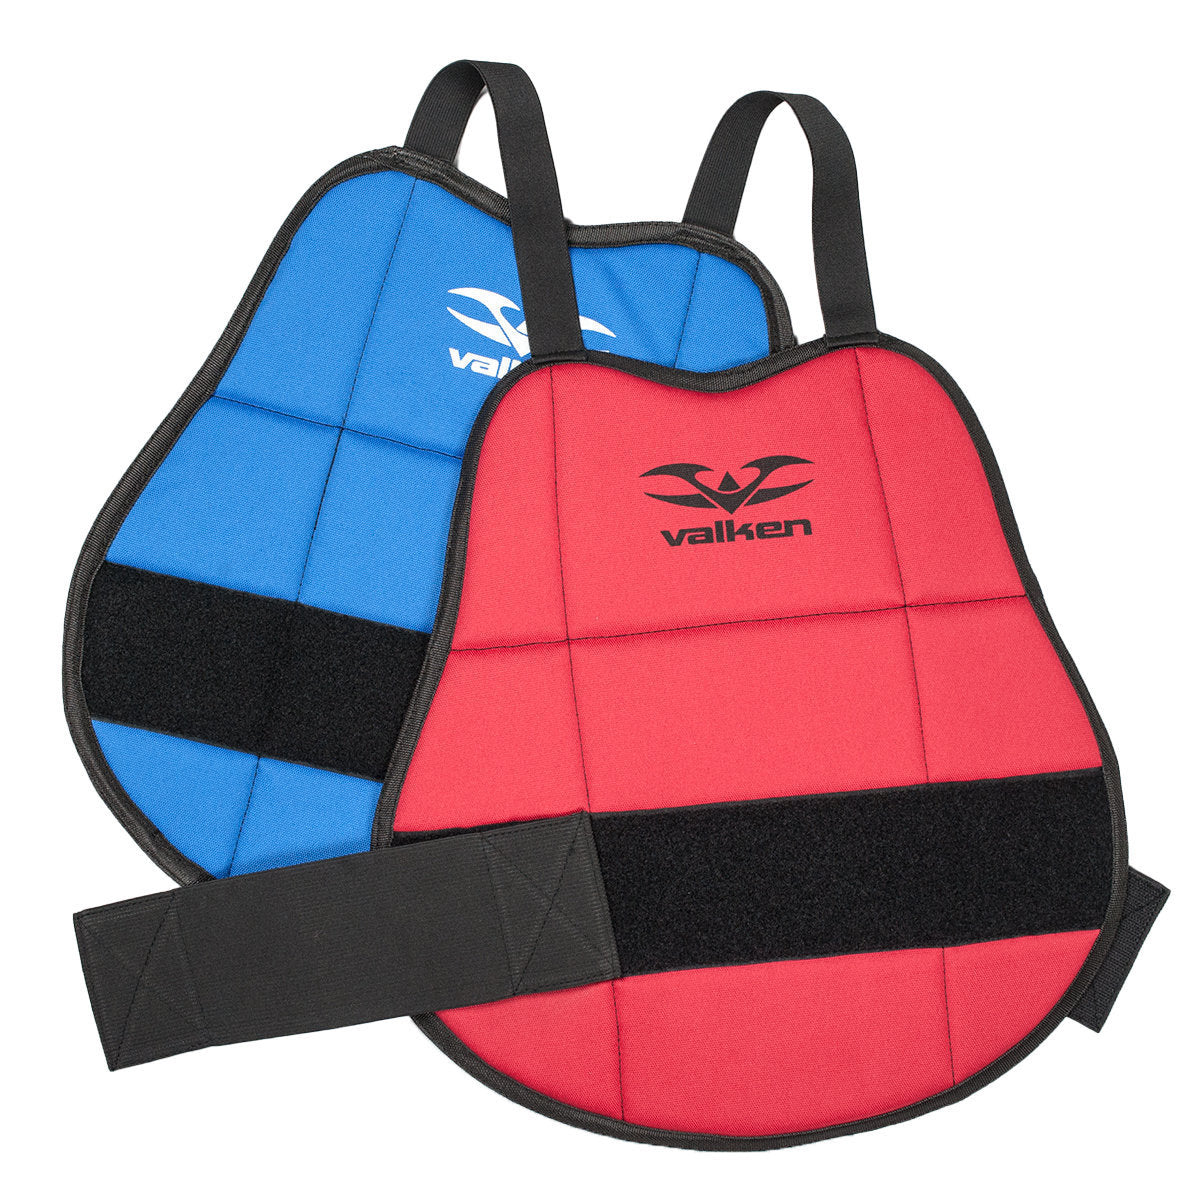 Reversible Blue/Red Valken Gotcha Paintball Chest Protector